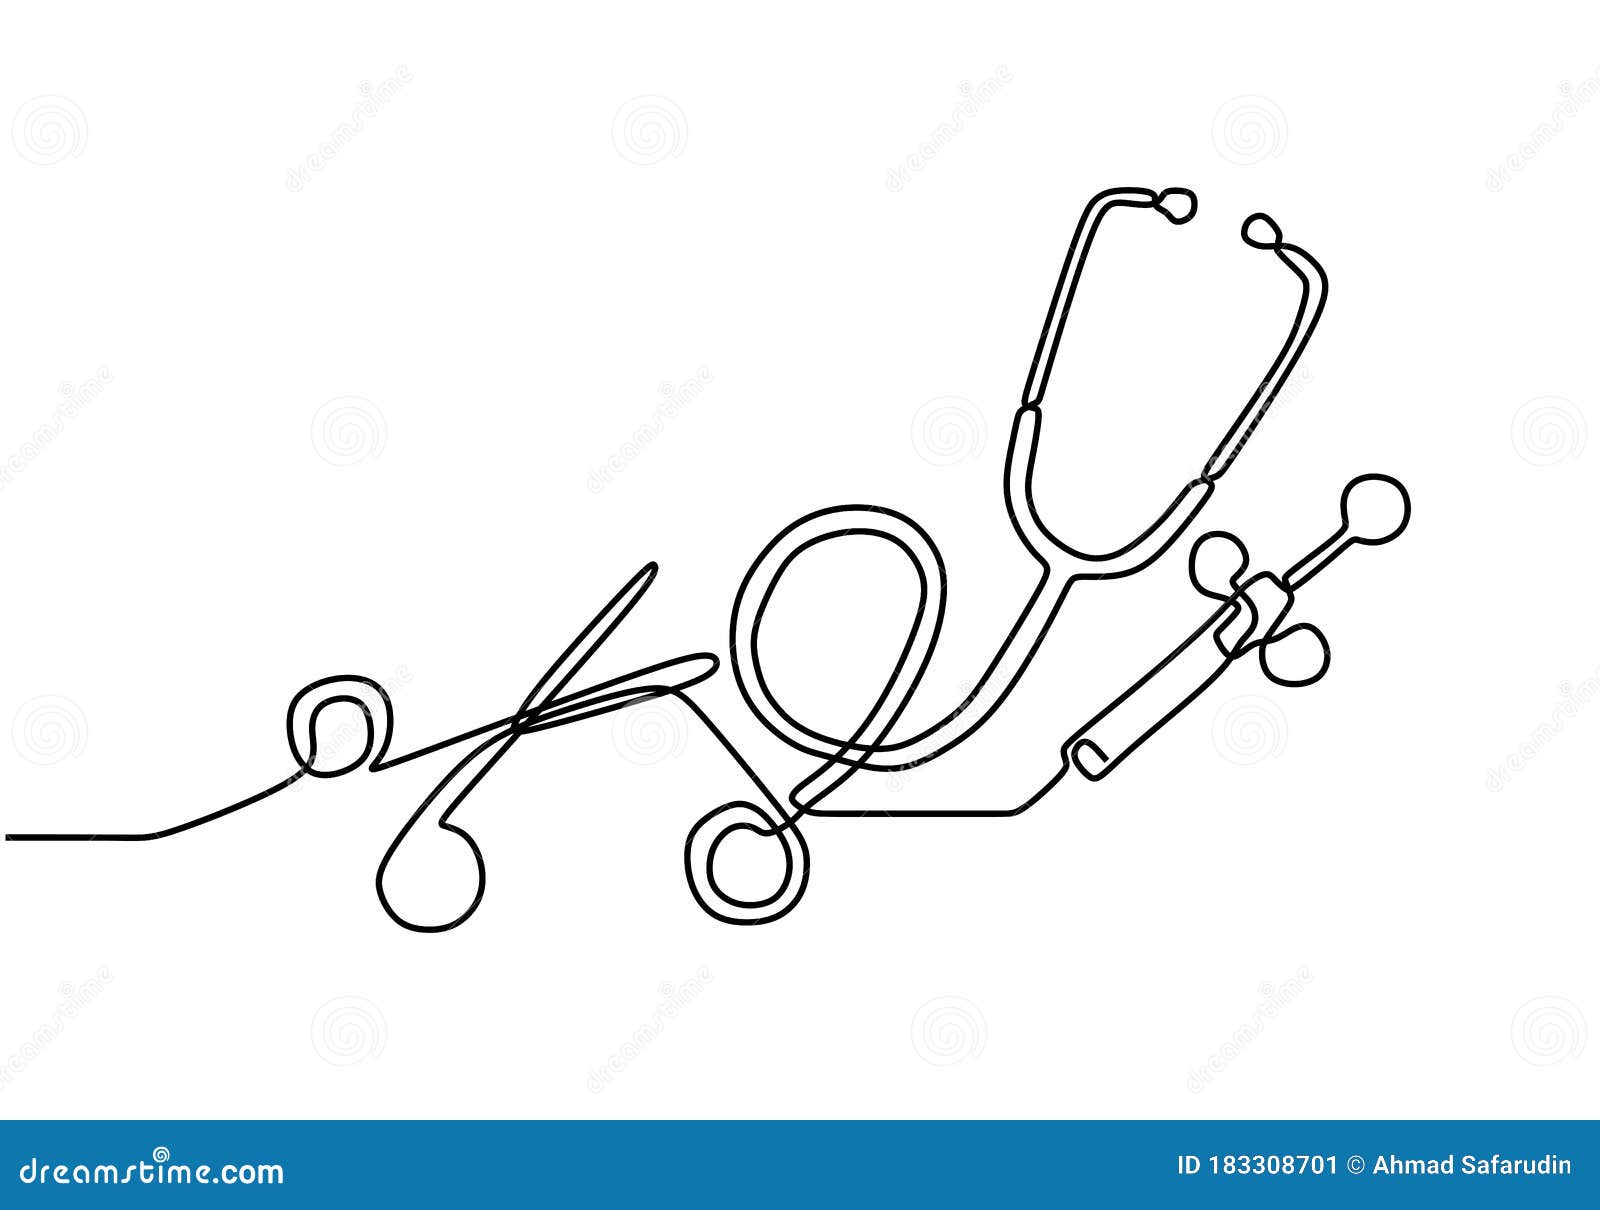 One Single Line Drawing Of Medical Equipment. Stethoscope